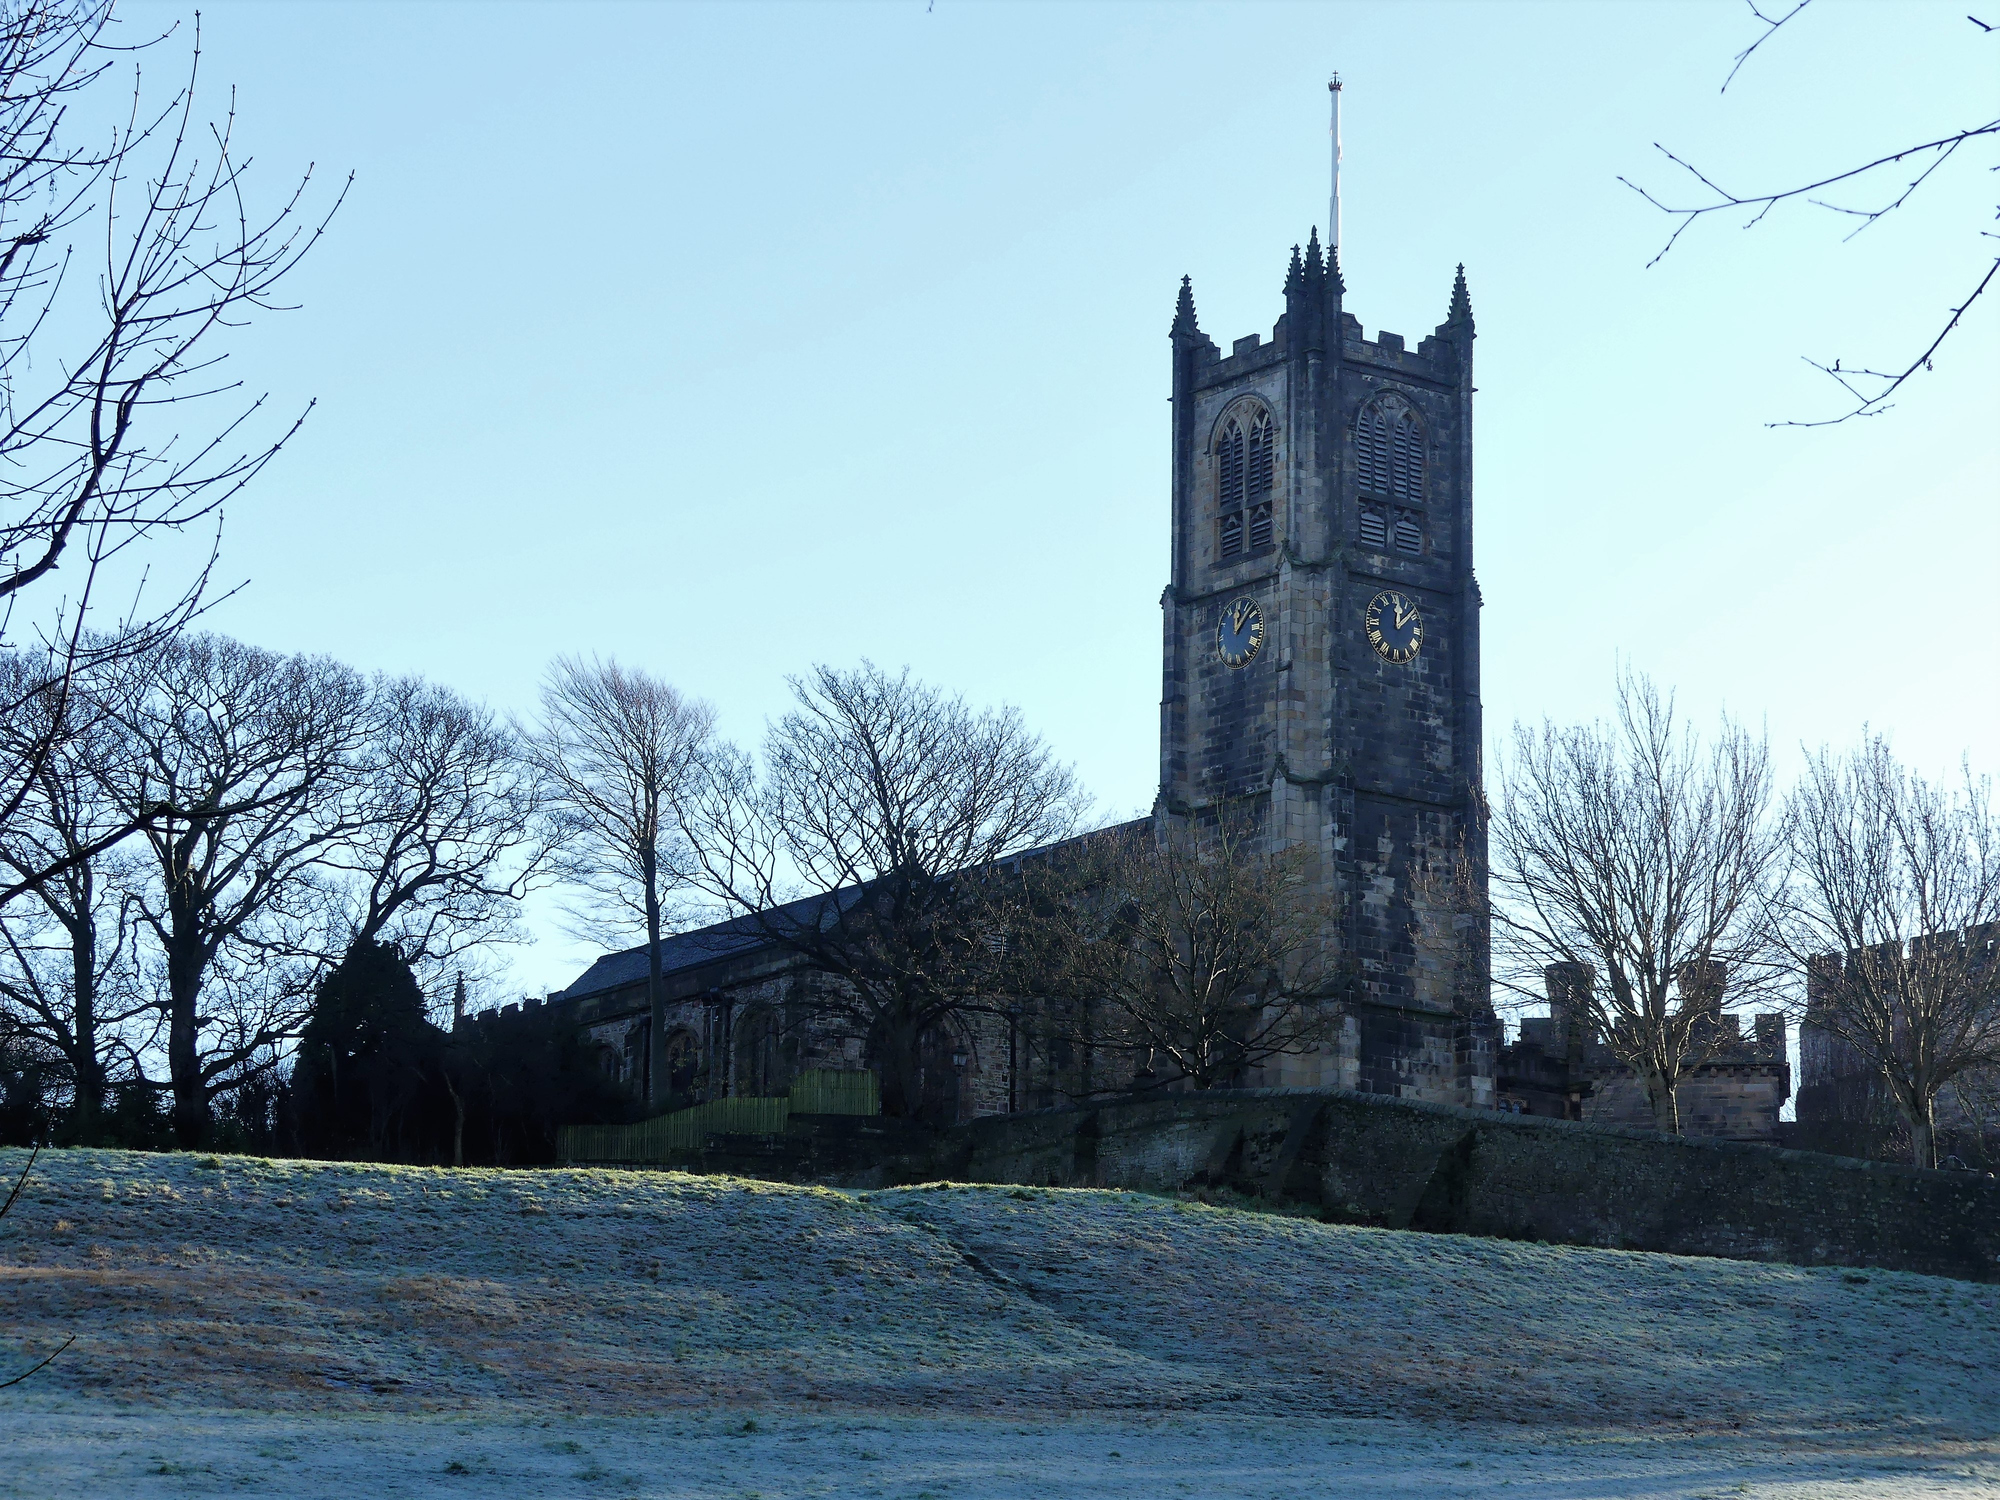 Lancaster, Lancashire, UK - December 24th 2018: Lancaster Priory church viewed from across Vicarage Field, Lancashire